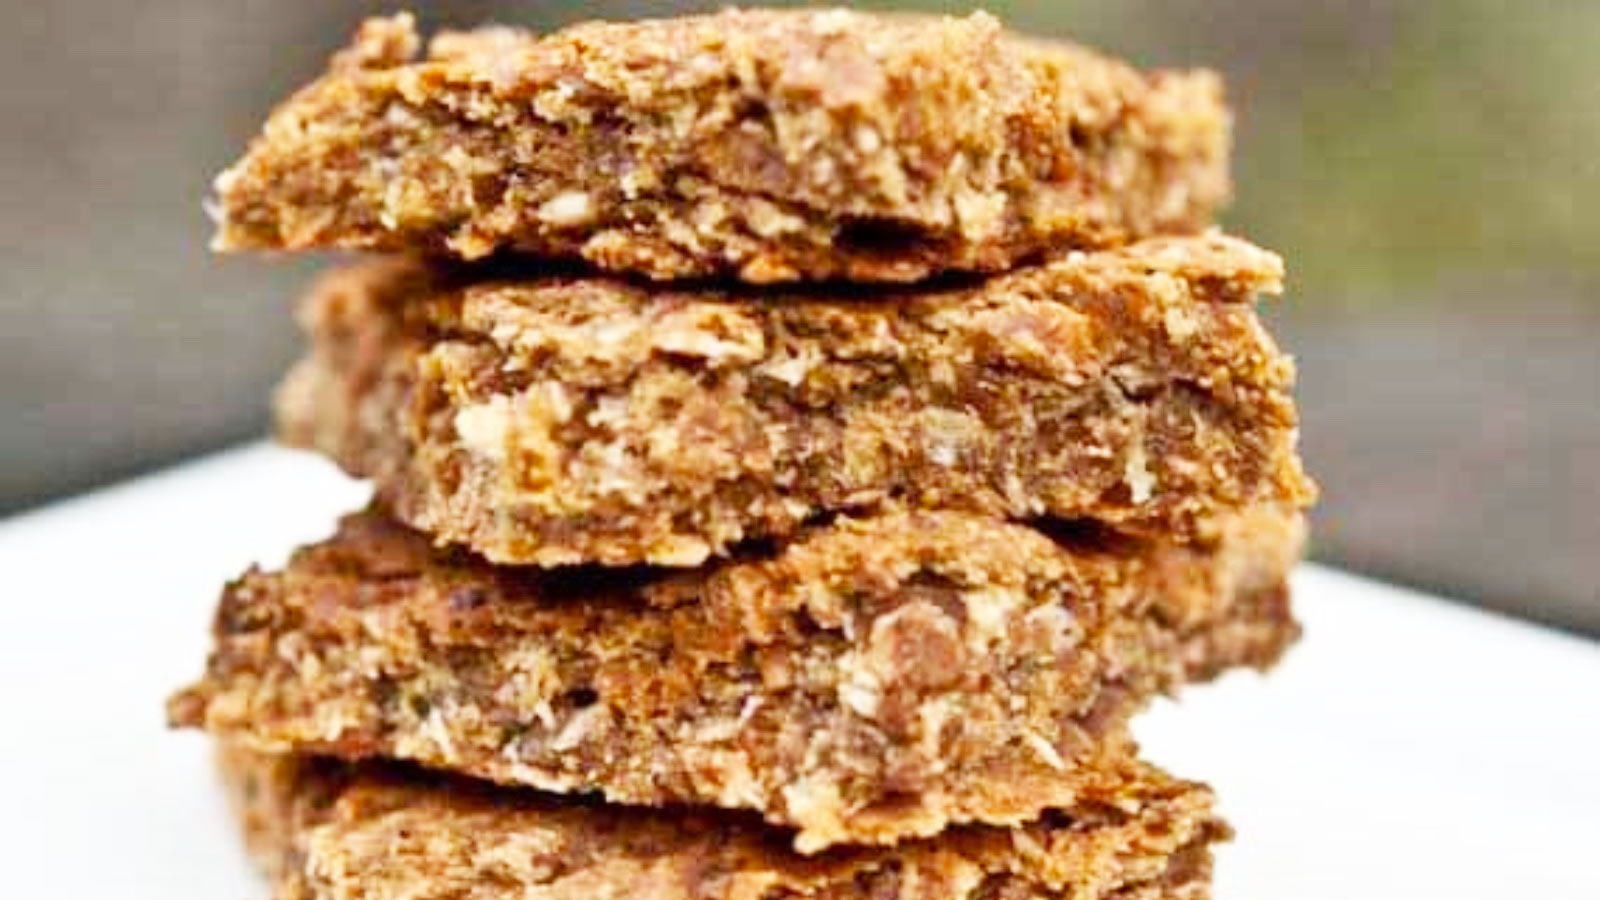 <p>These <a href="https://www.thegraciouspantry.com/clean-eating-coconut-lime-oat-bars/">coconut lime oatmeal bars</a> have a tropical flavor and a cookie-like texture that you are going to love. Just six kitchen staple ingredients and a little time are all you need before you have one of these amazing bars melting in your mouth.</p>